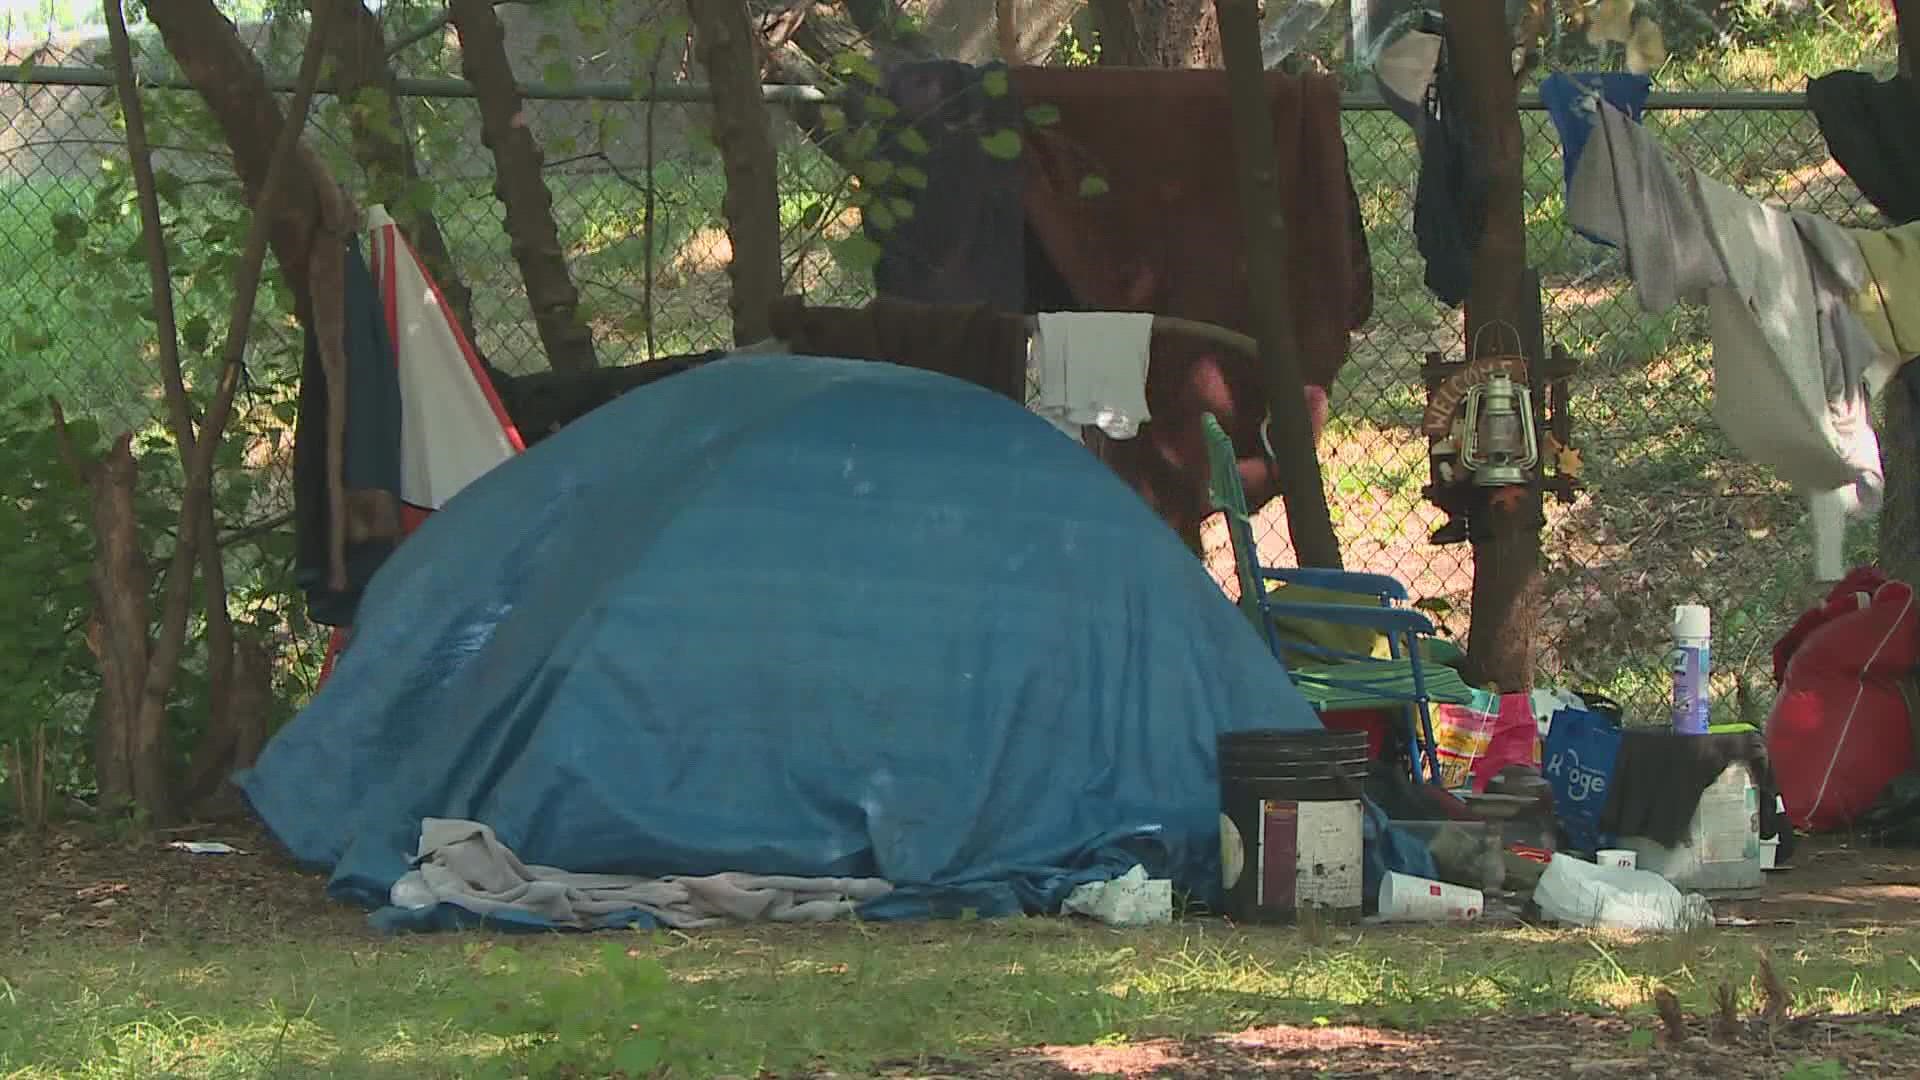 Louisvillians caught violating the new law could be fined anywhere between $50-250, adding a burden to people who are already living on the street.